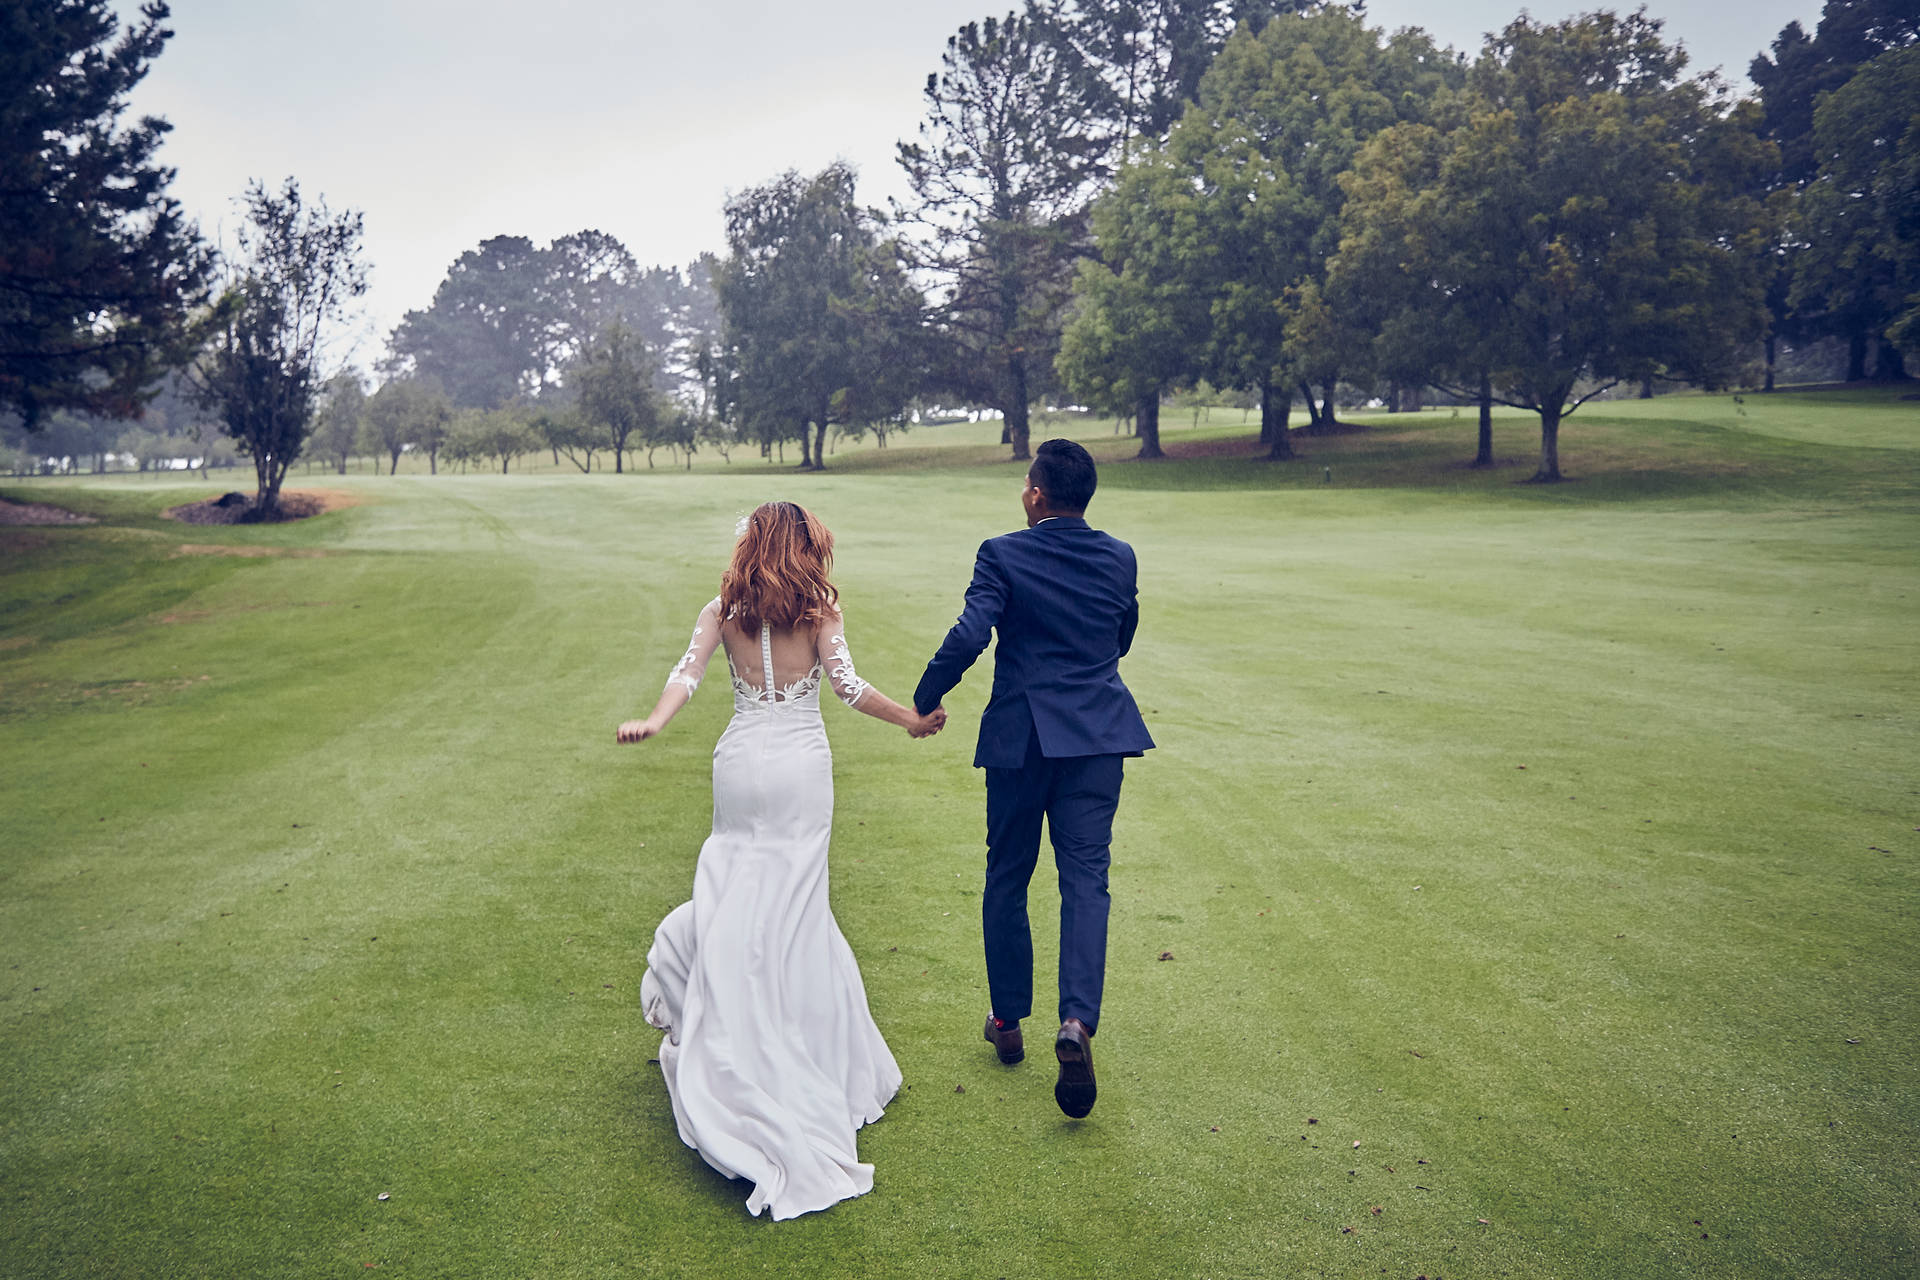 Groom And Bride Running On Golf Course Background